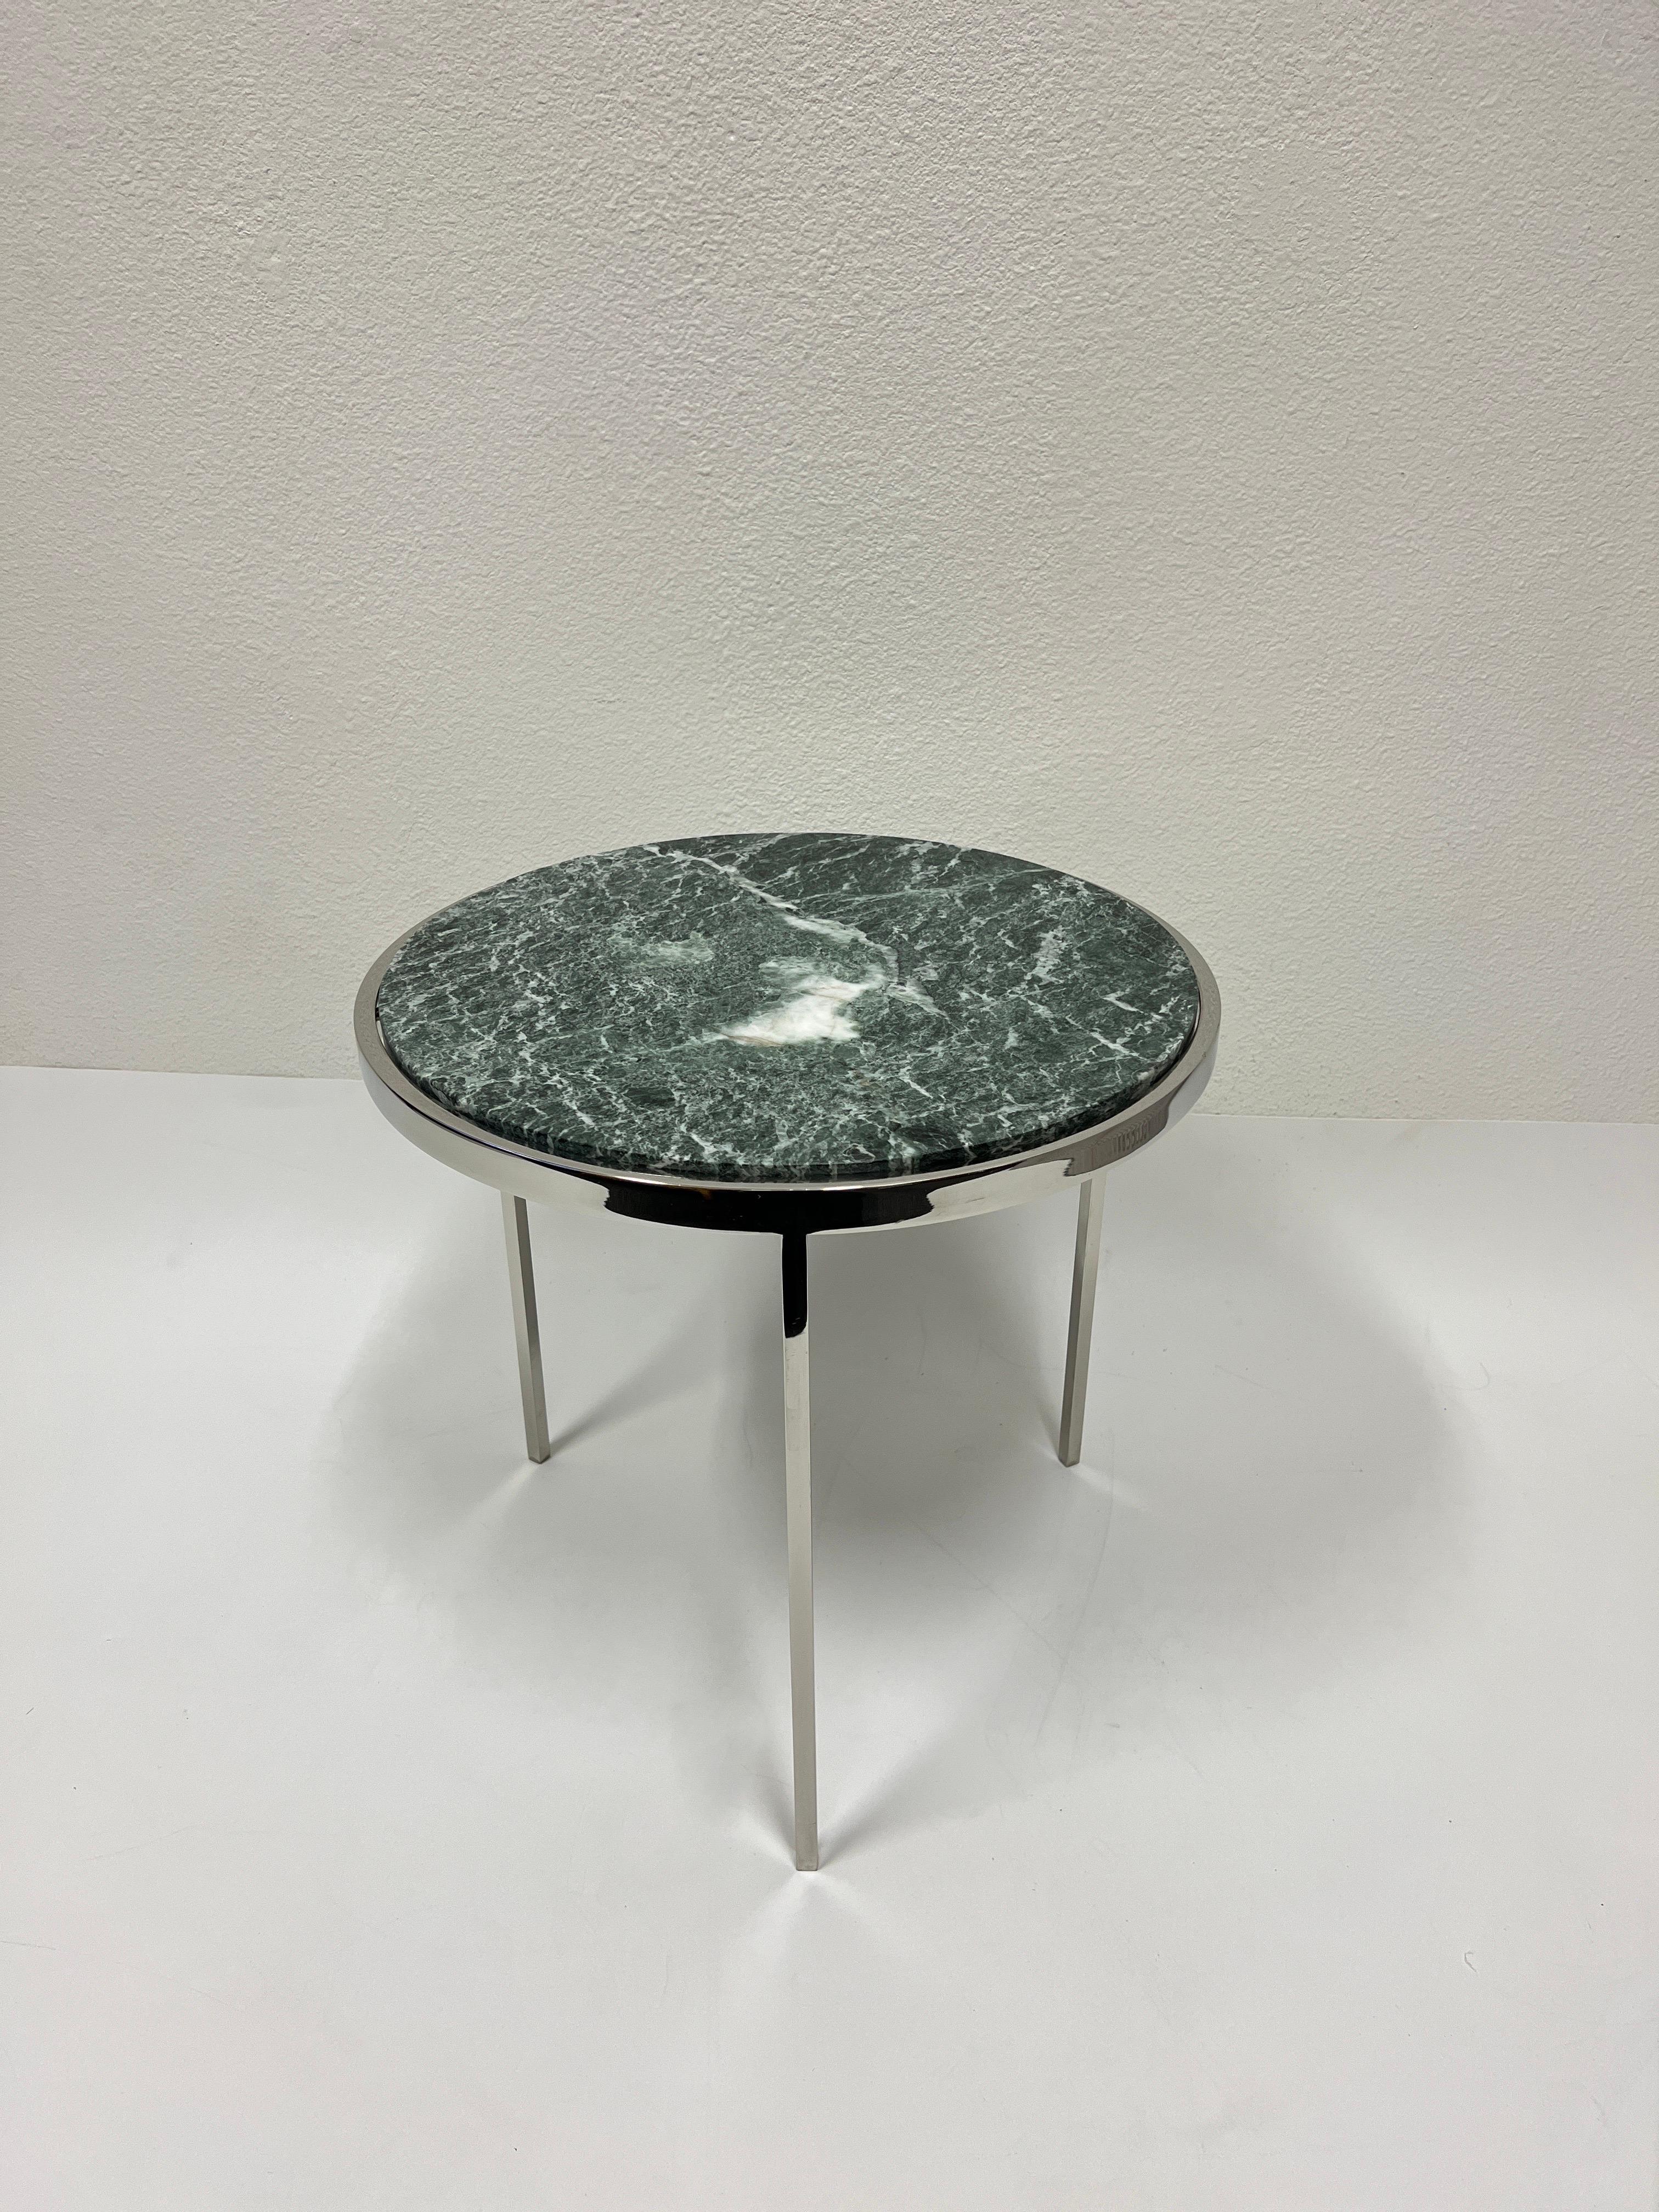 Green Marble and Polished Stainless Steel Round Tripod Side Table by Brueton  For Sale 1